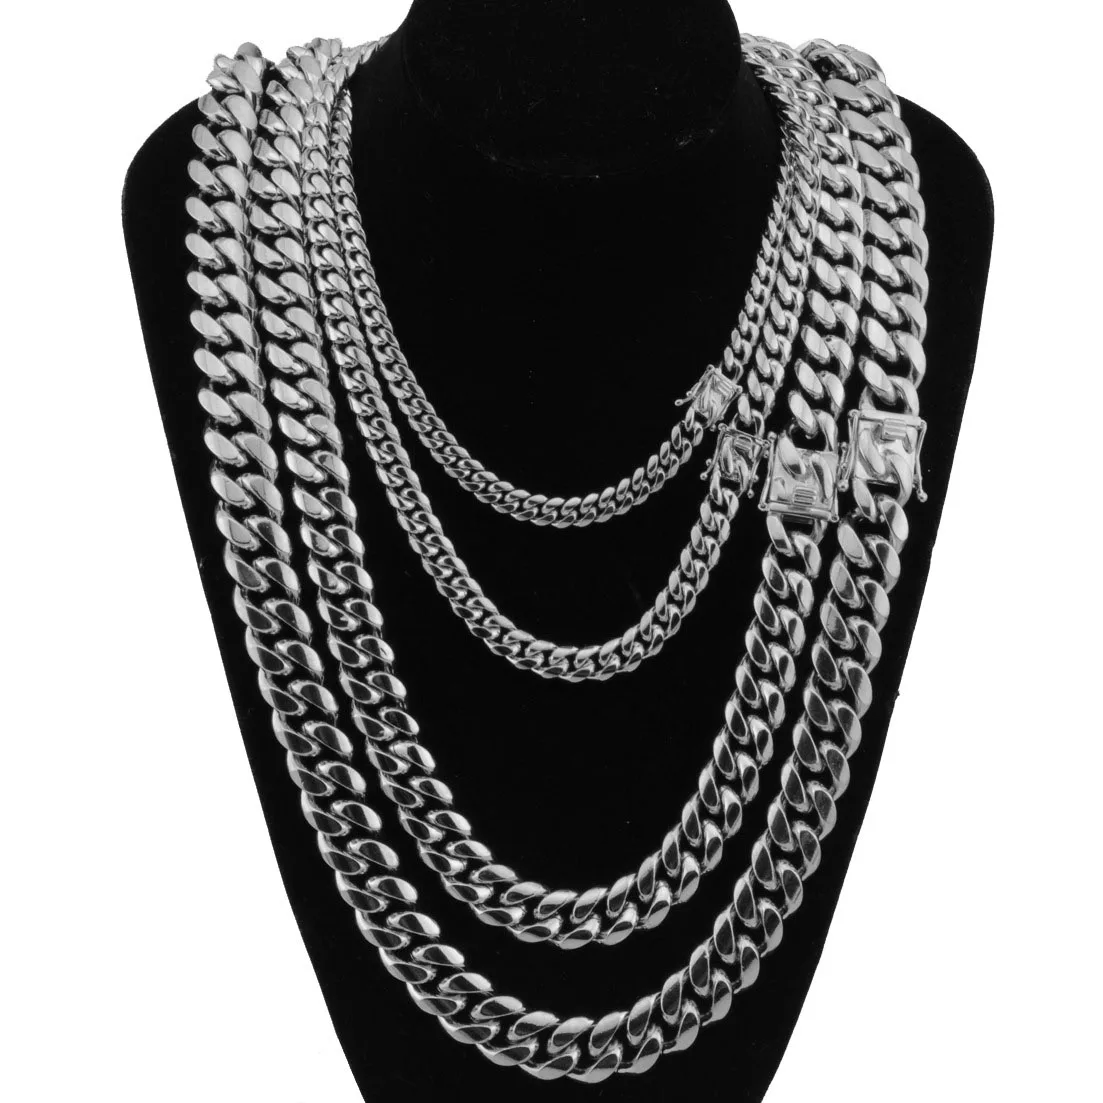 8/10/12/14/16mm Men Stainless Steel Curb Cuban Link Chain Necklace Jewelry Gift